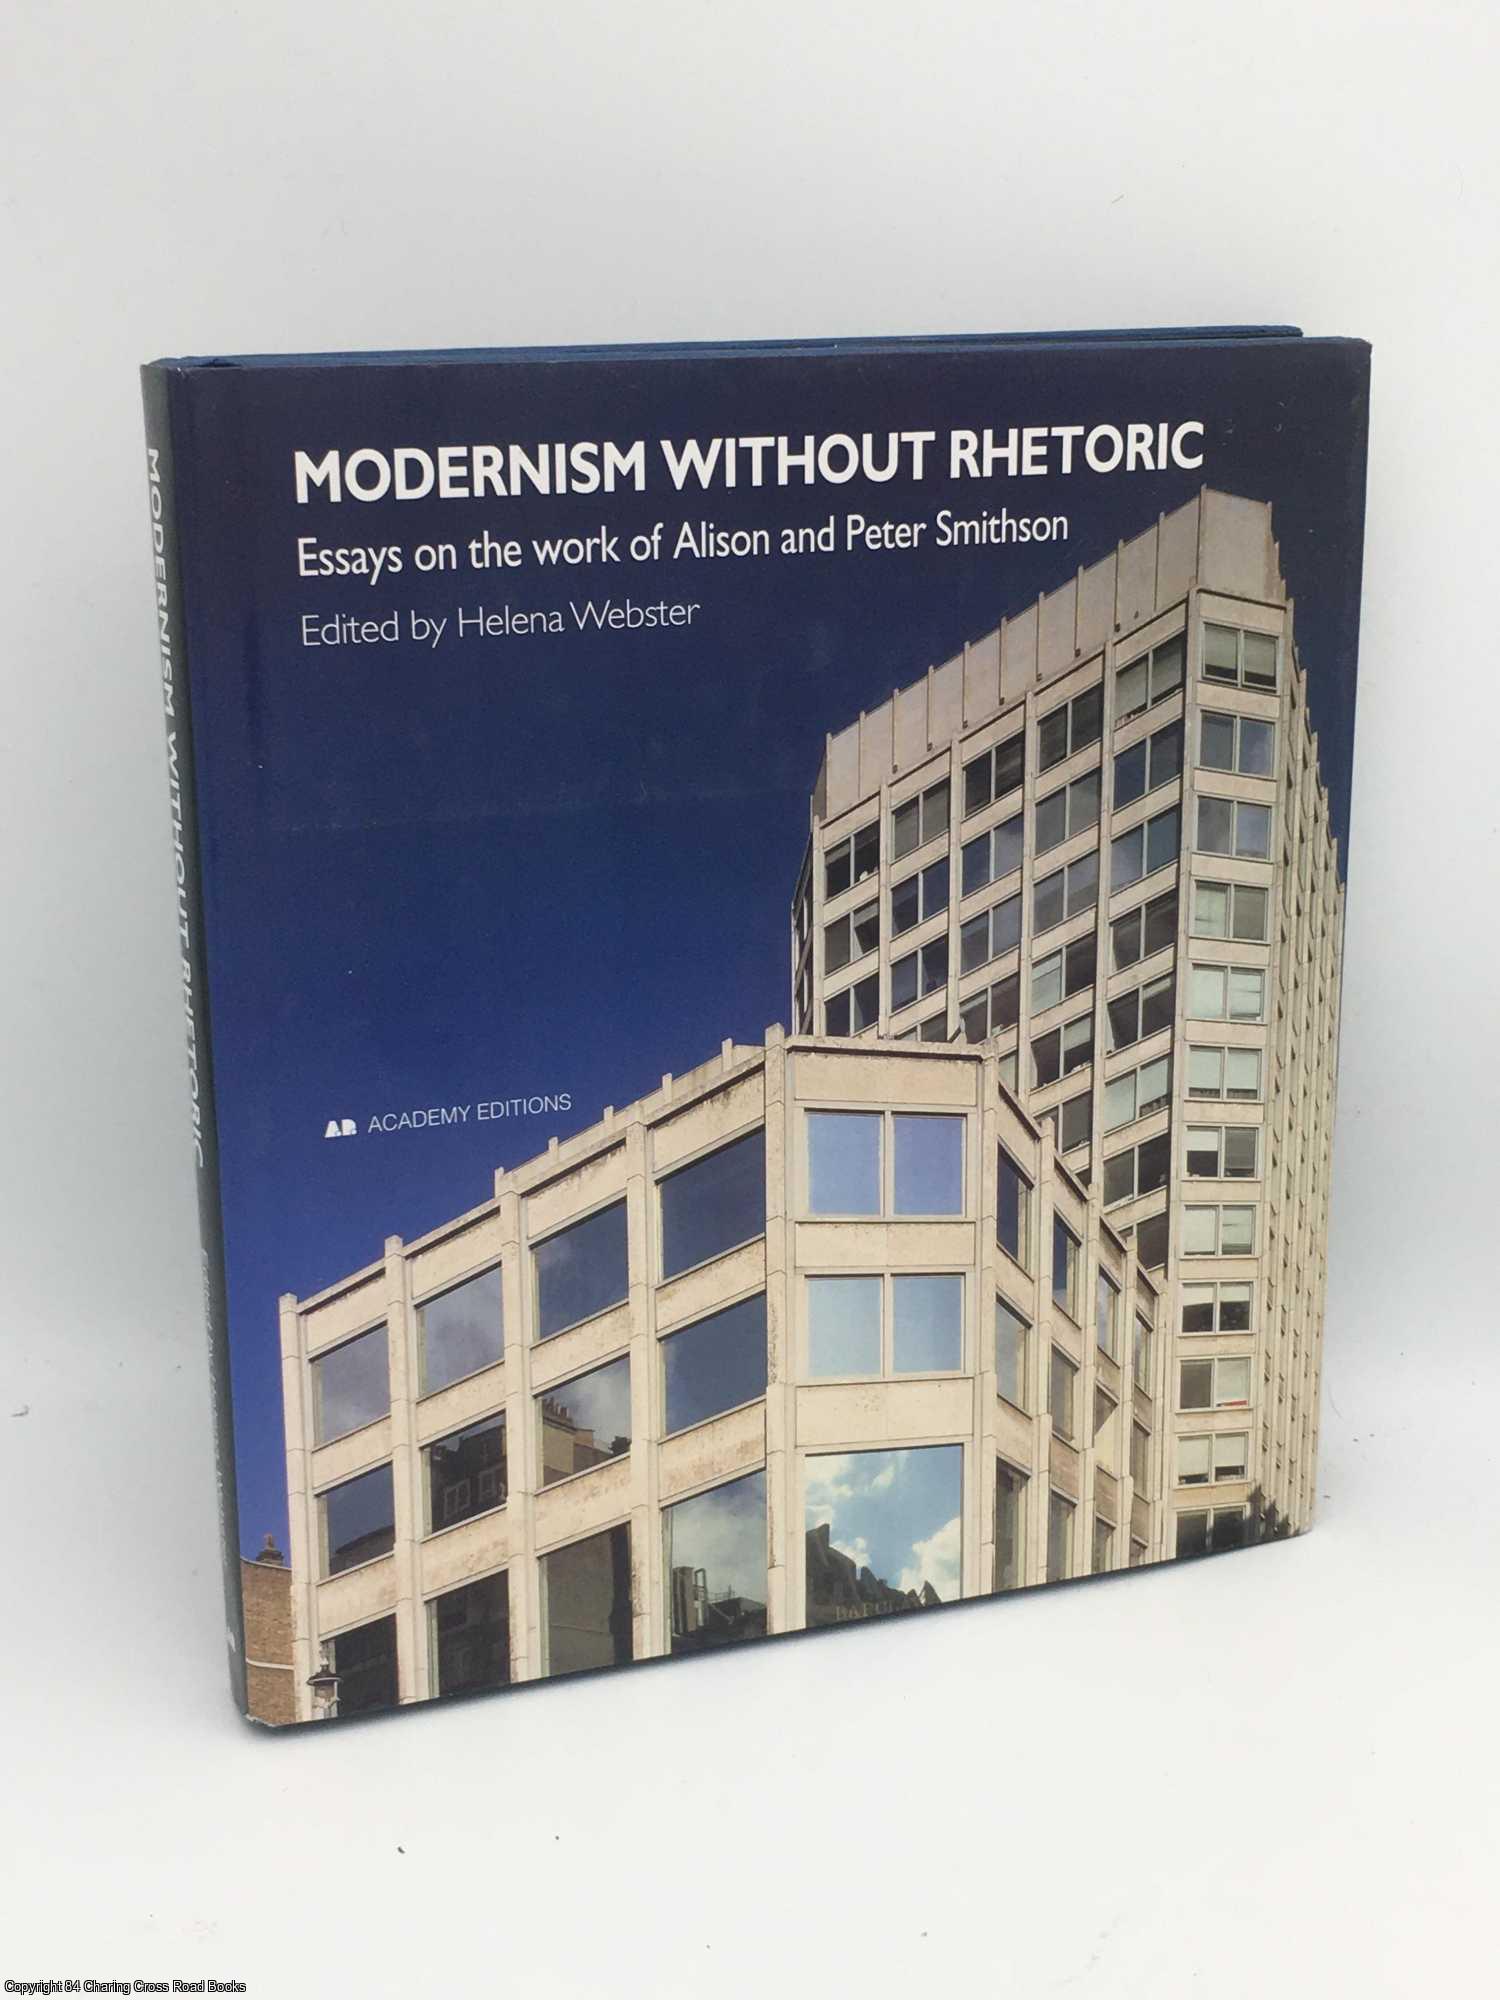 Webster, Helena - Modernism without Rhetoric: The Work of Alison and Peter Smithson